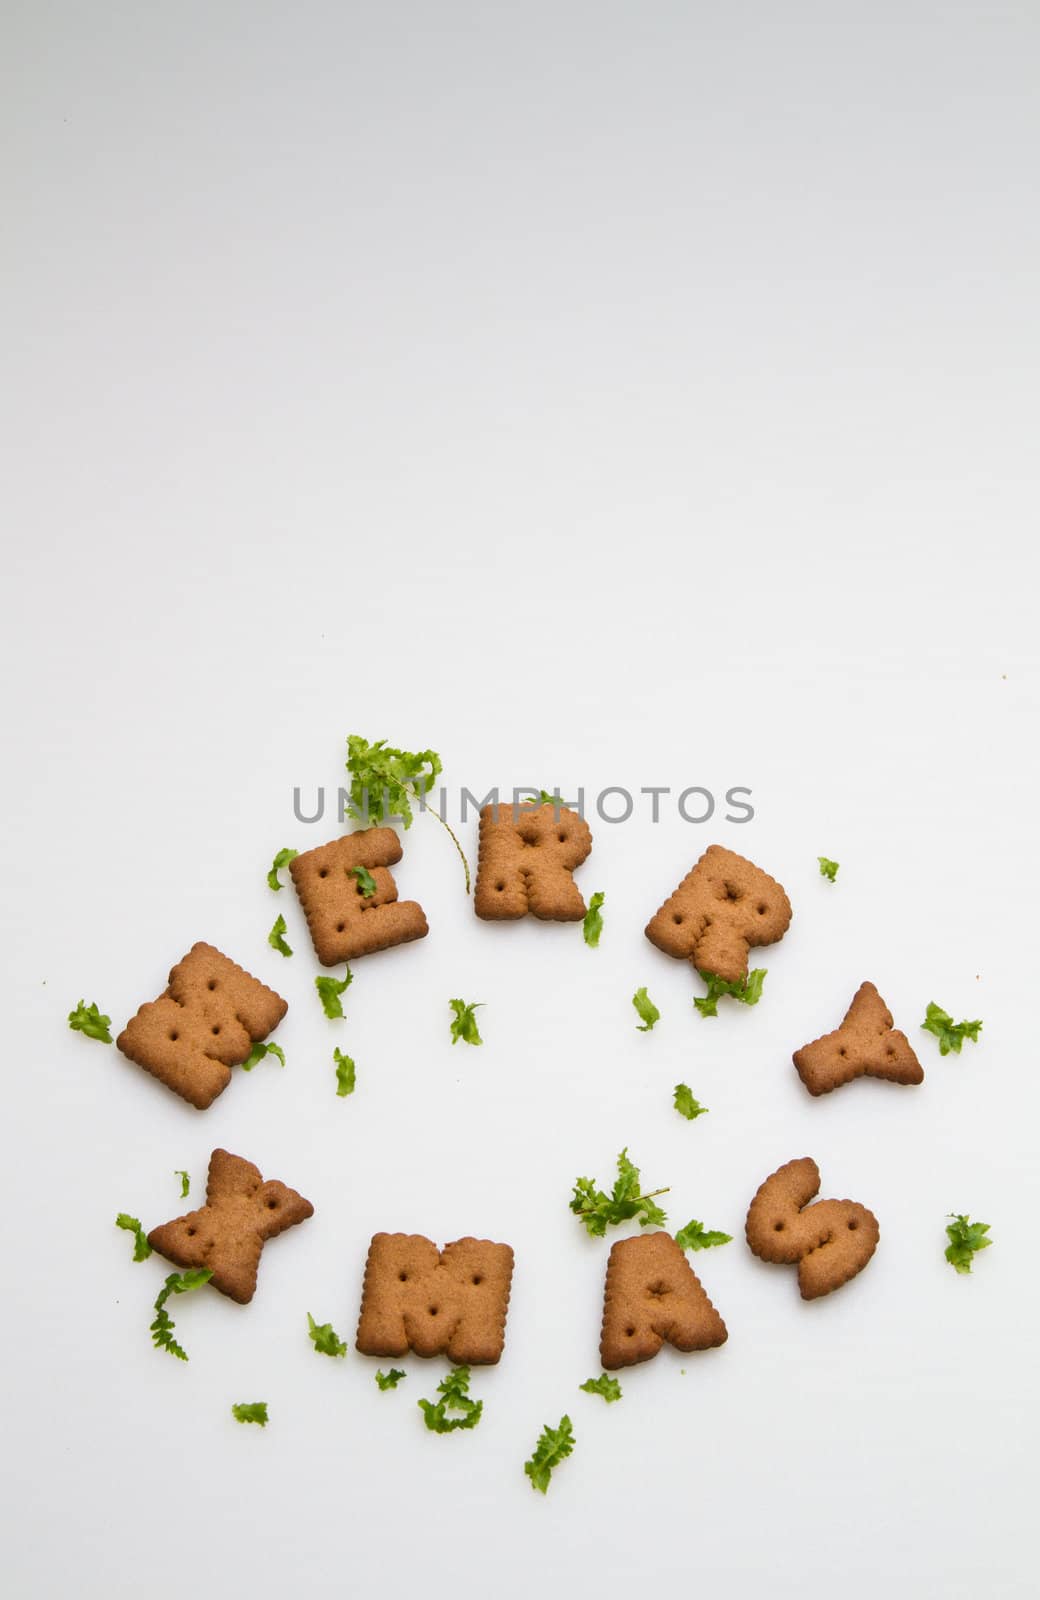 Merry Xmas wording from brown biscuits with green leaves on white background in portrait orientation